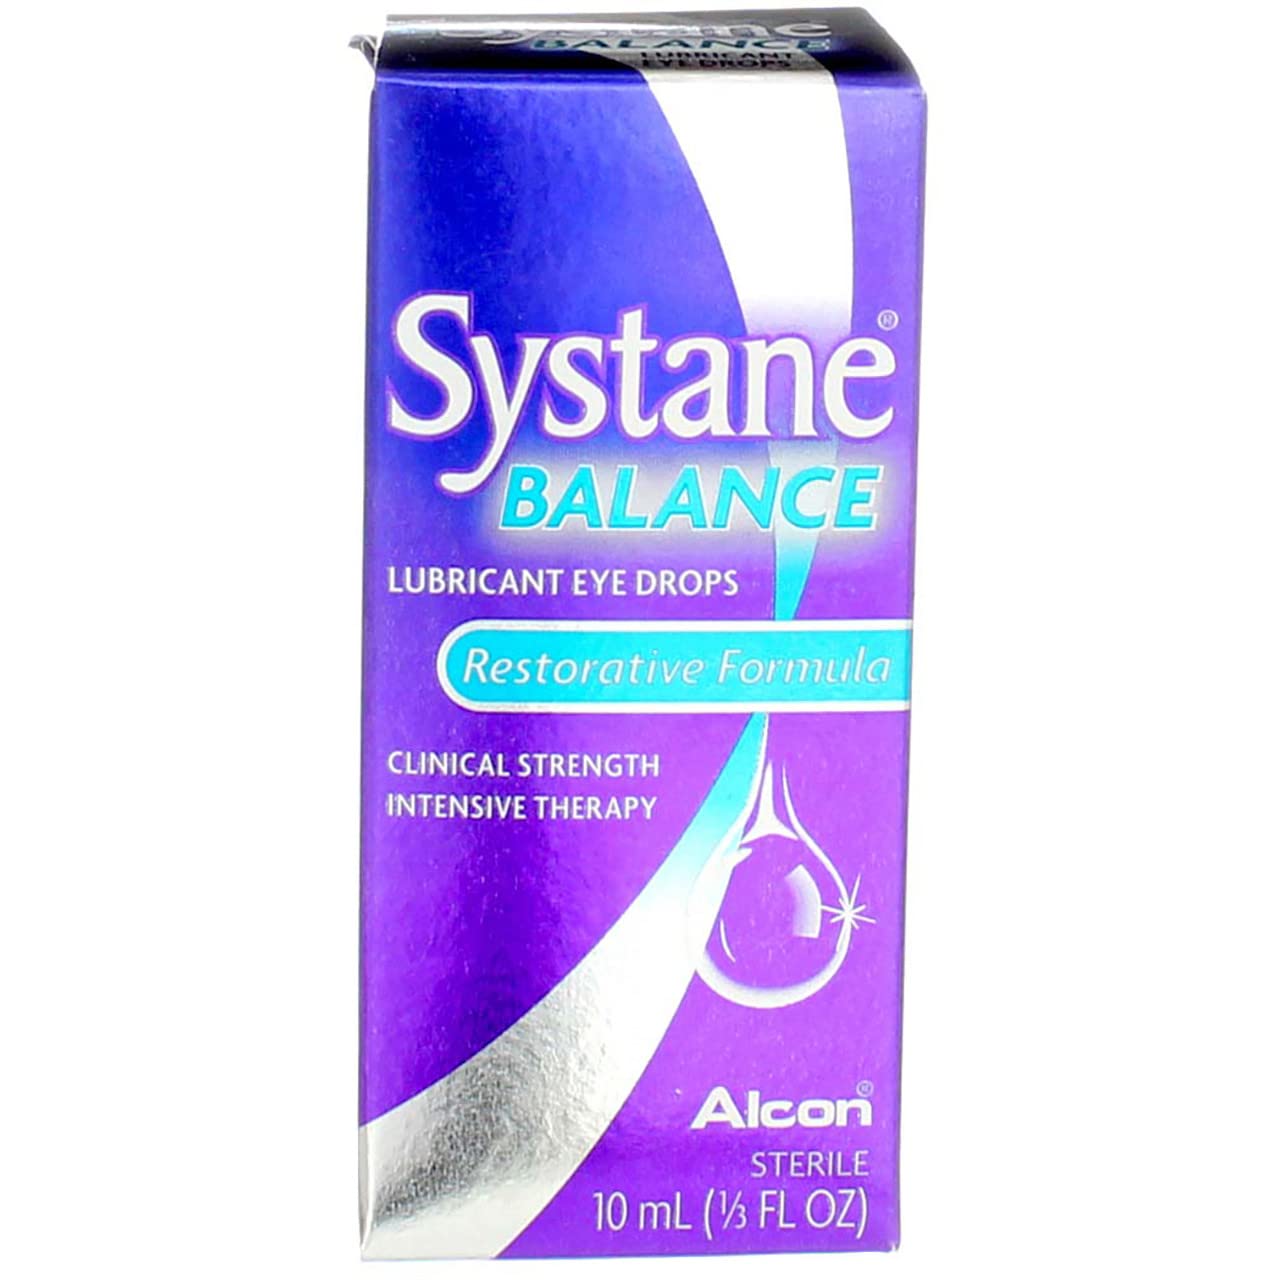 Systane Balance Lubricant Eye Drops, Restorative Formula, 0.33-Ounce (Pack of 24)